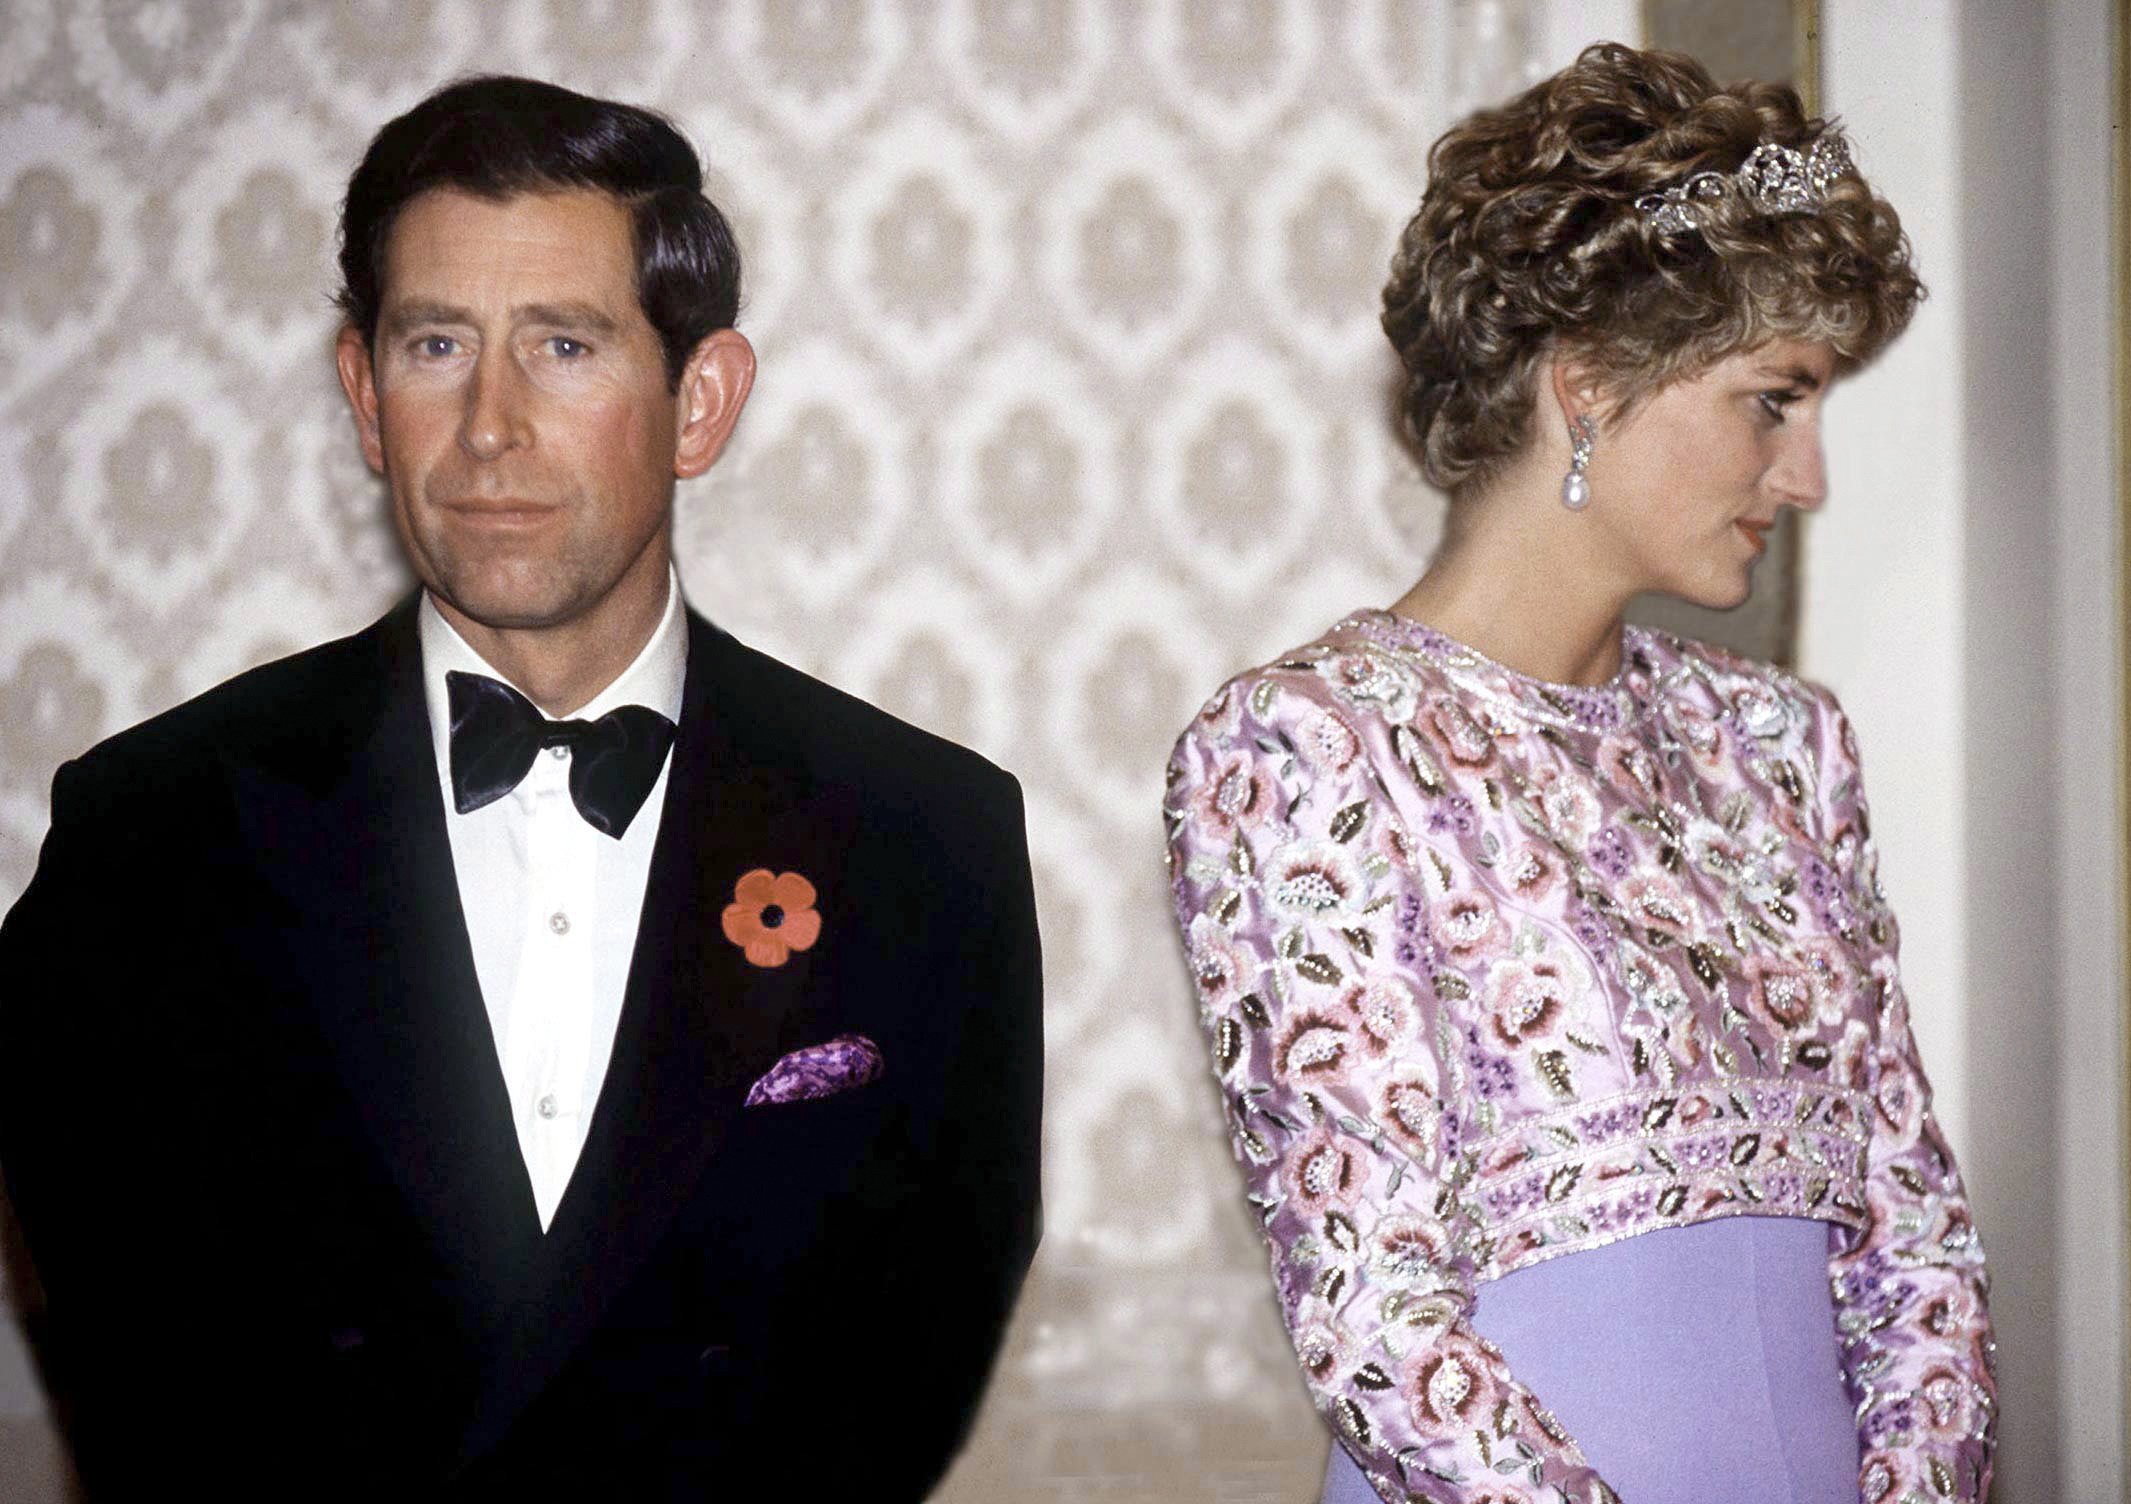 Charles, Princes of Wales with his wife, Diana, Princess of Wales photographed on their last official trip together, during their visit to South Korea. / Source: Getty Images